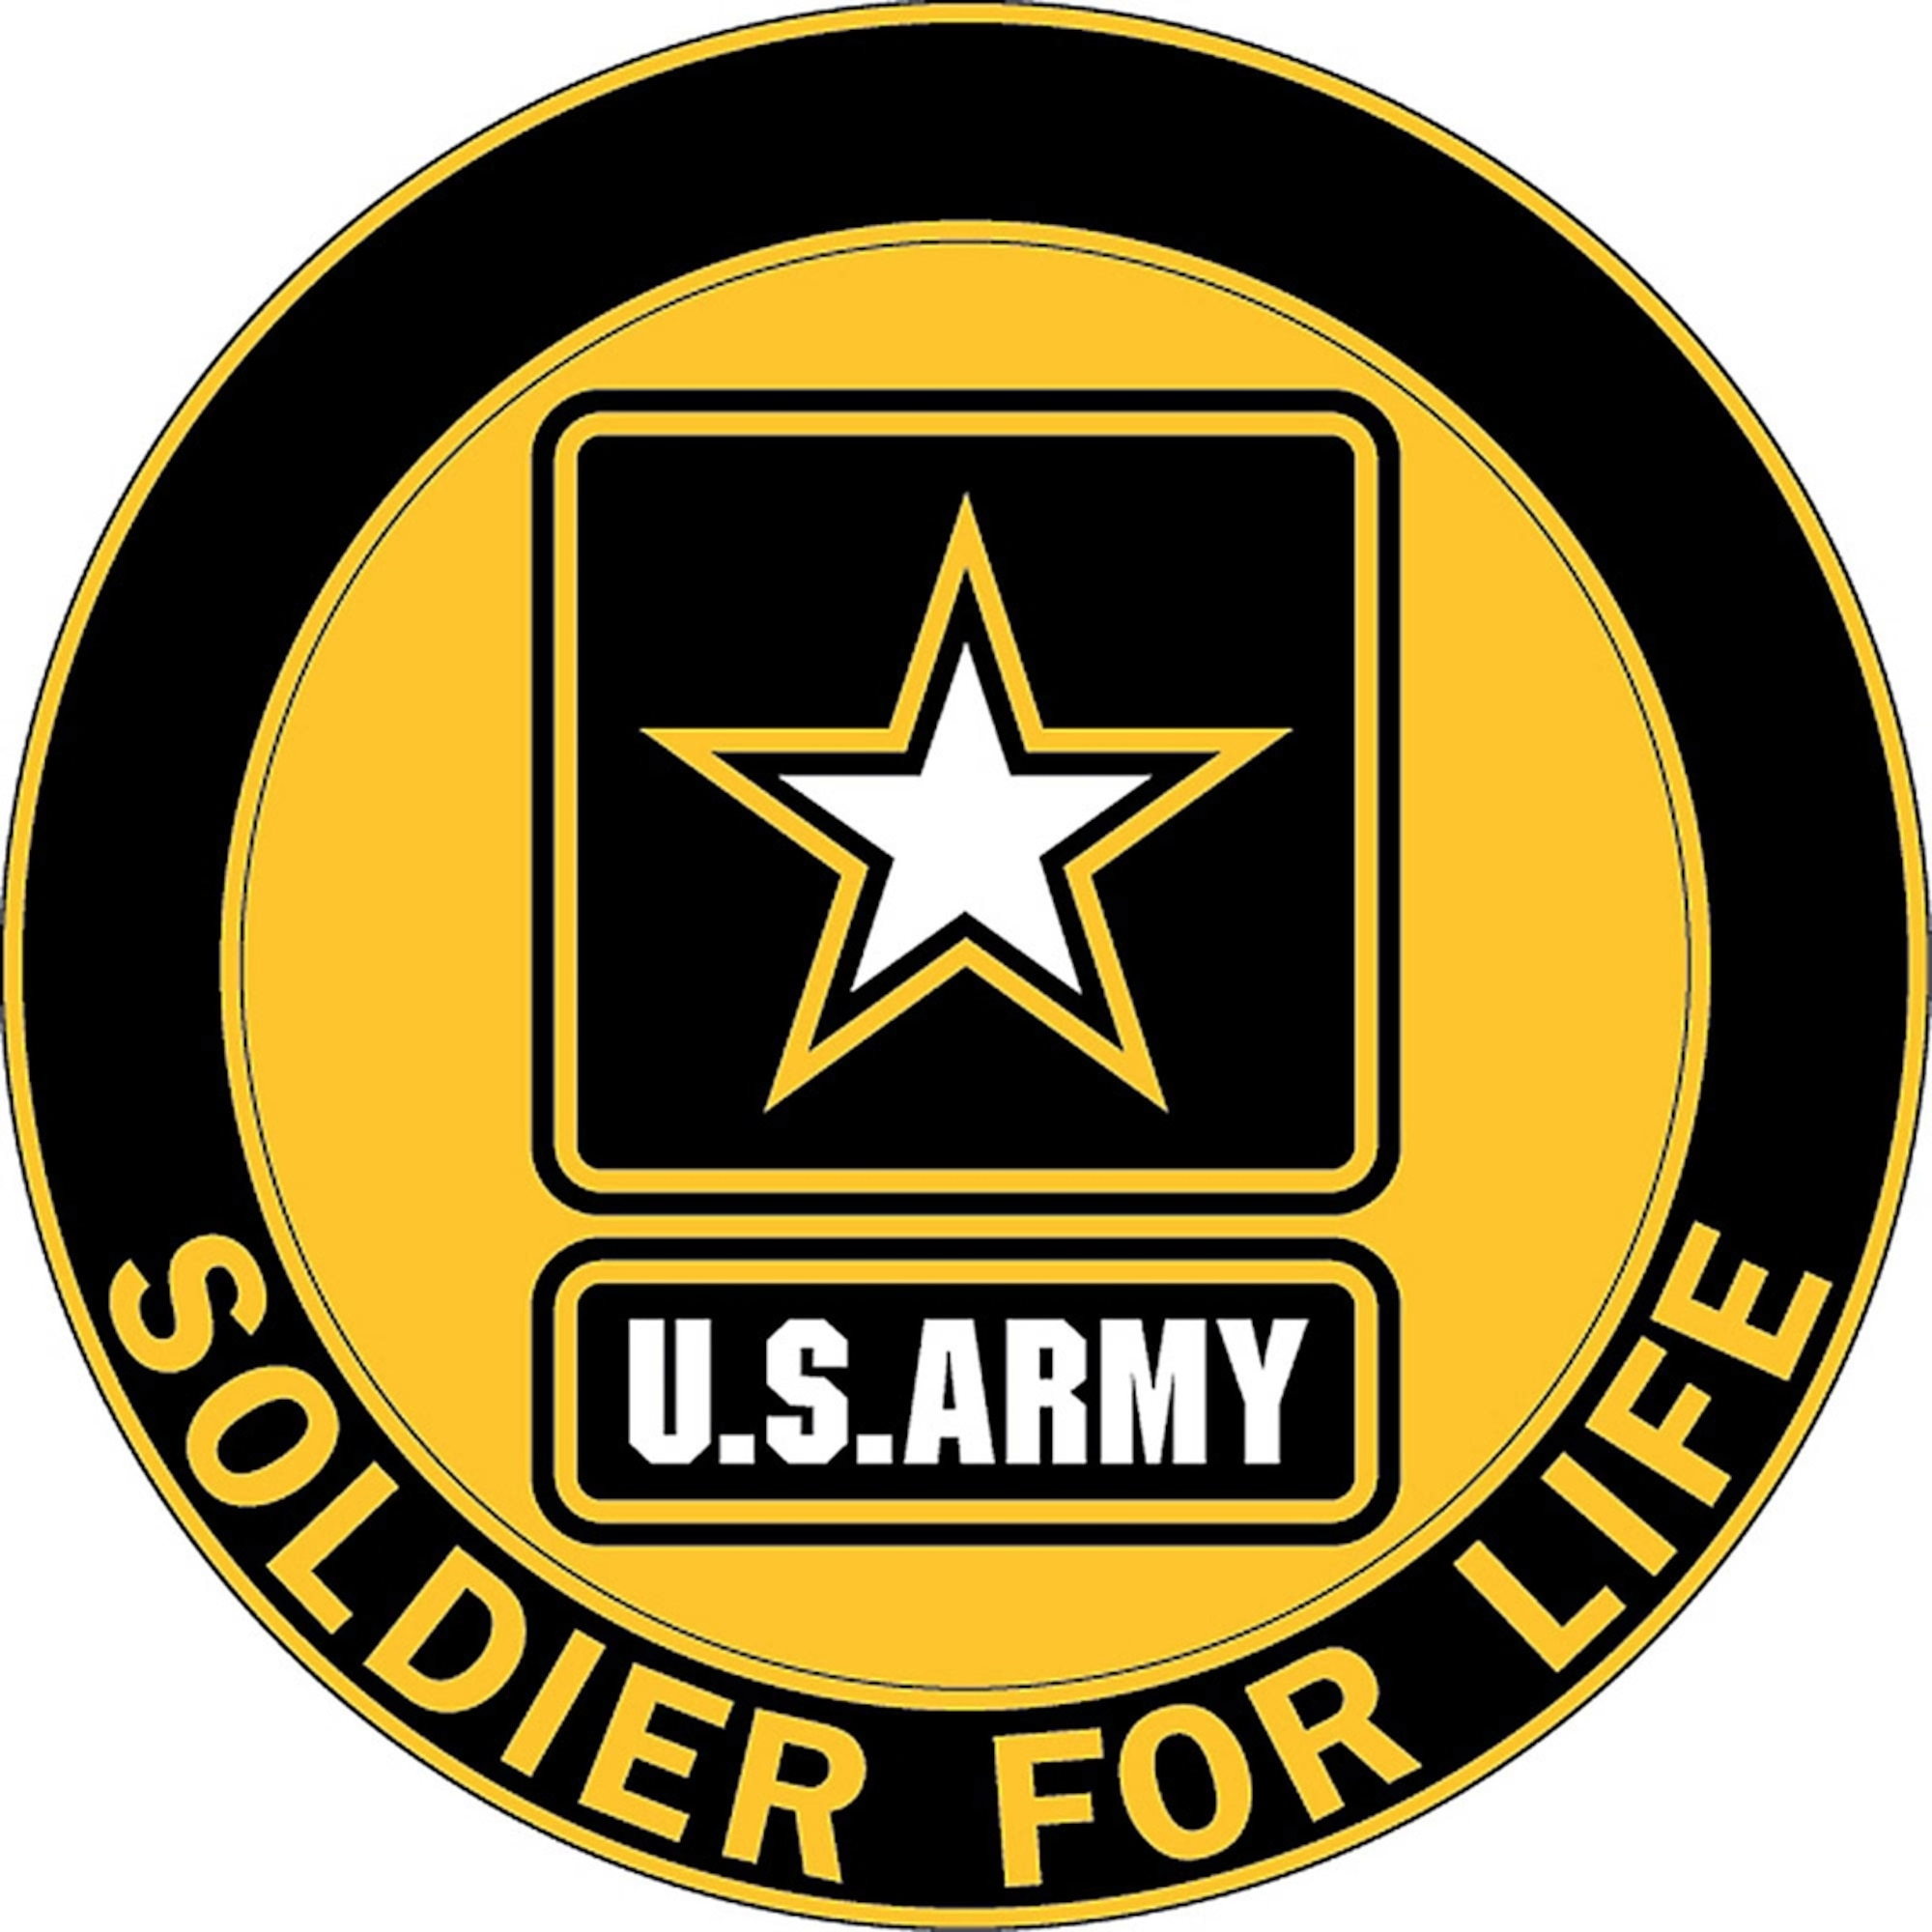 A Soldier for Life identifies with the Army even after their service ends; they are advocates for Army service. (Graphic by the U.S. Army)